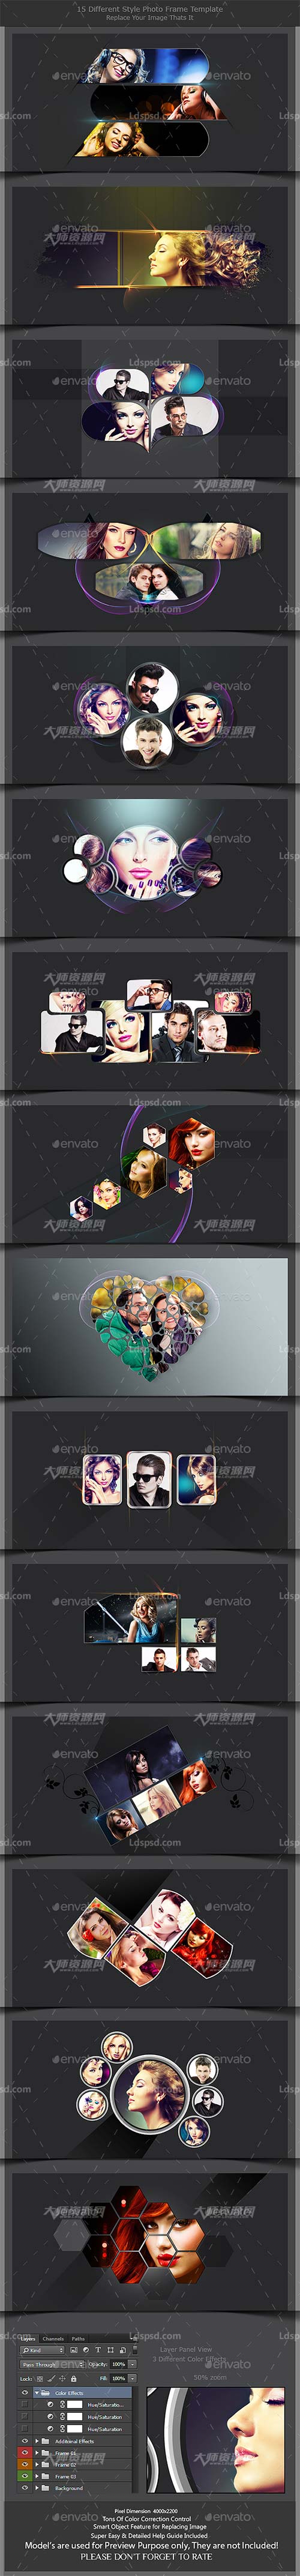 15 Different Styles Photo Frame Template,15个时尚的不同风格的图像框架模板